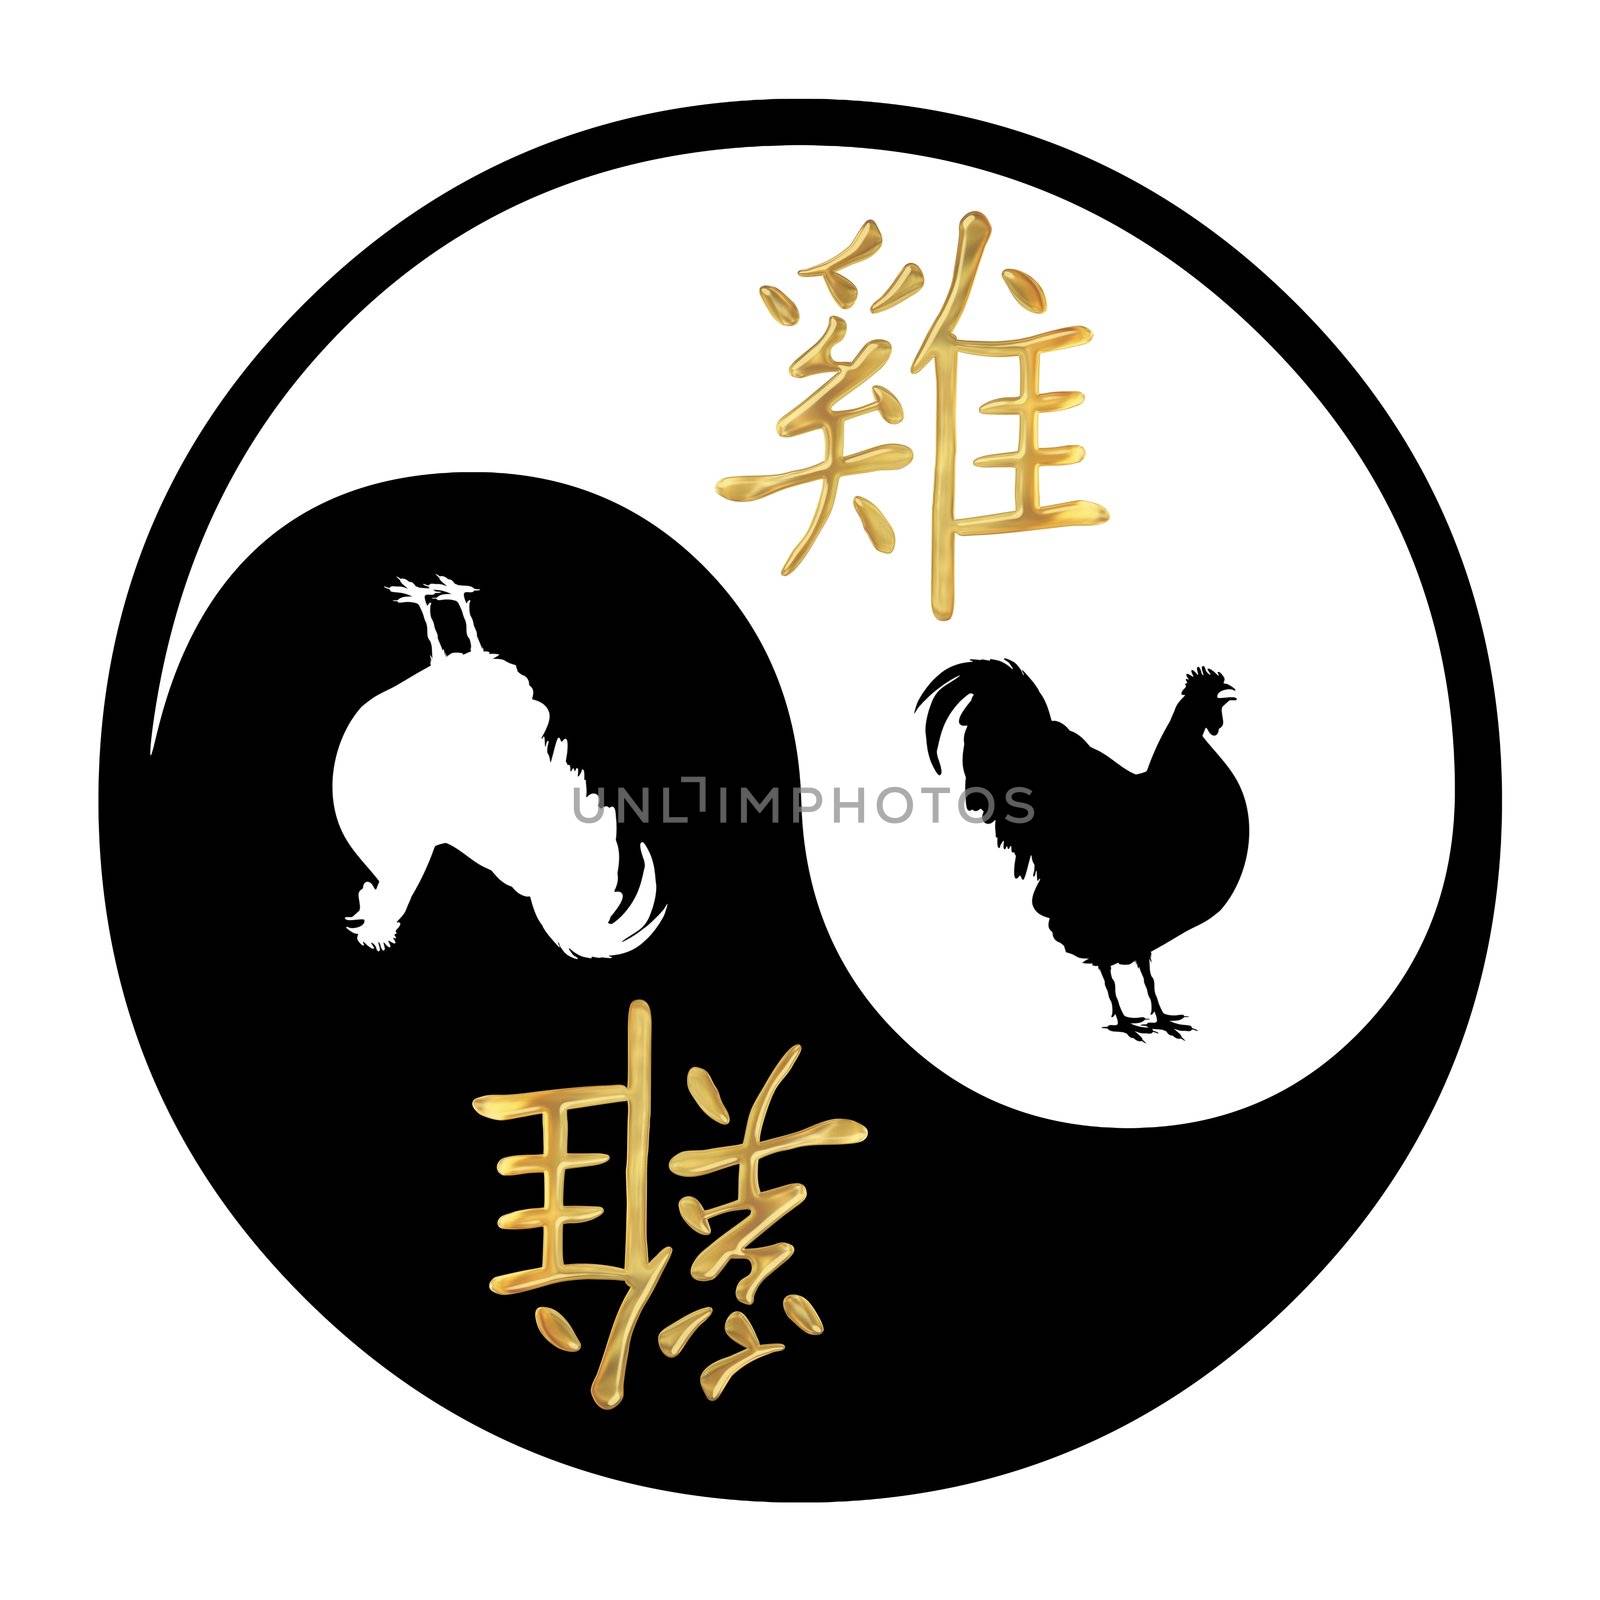 Yin Yang symbol with Chinese text and image of a Rooster